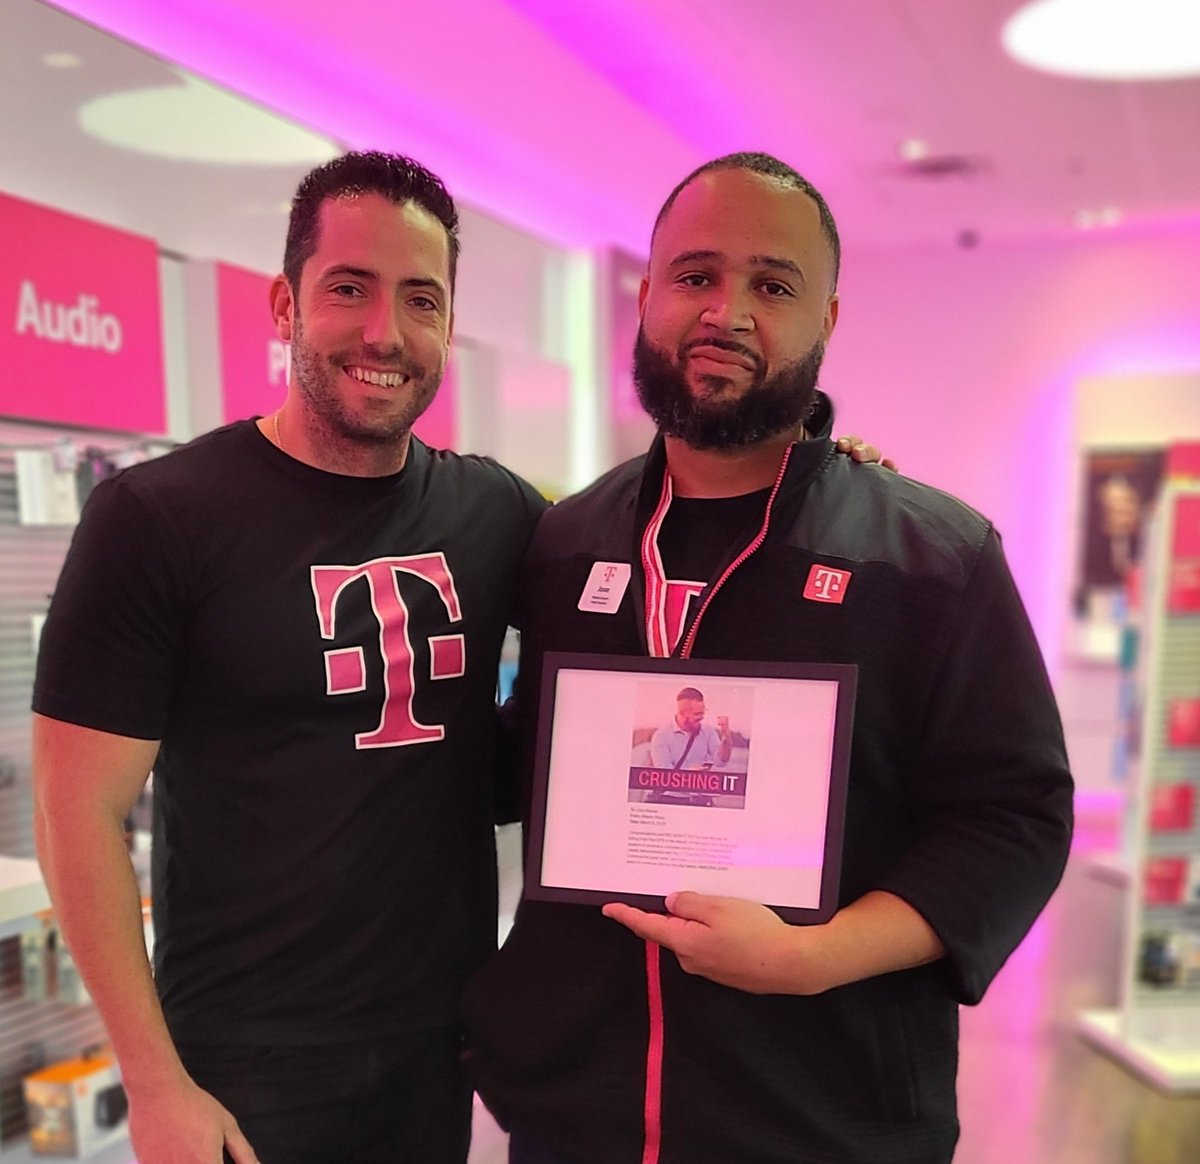 Great job Jose Alemar with the most post BTS for West Fort Lauderdale District in February!! It was a pleasure expending some time at U&G and delivering this recognition! #FTLWP @MagentaSandra @DonnaStoner10 @SievertMike @RyanShiell @JonFreier @TMobile @CossioSteven